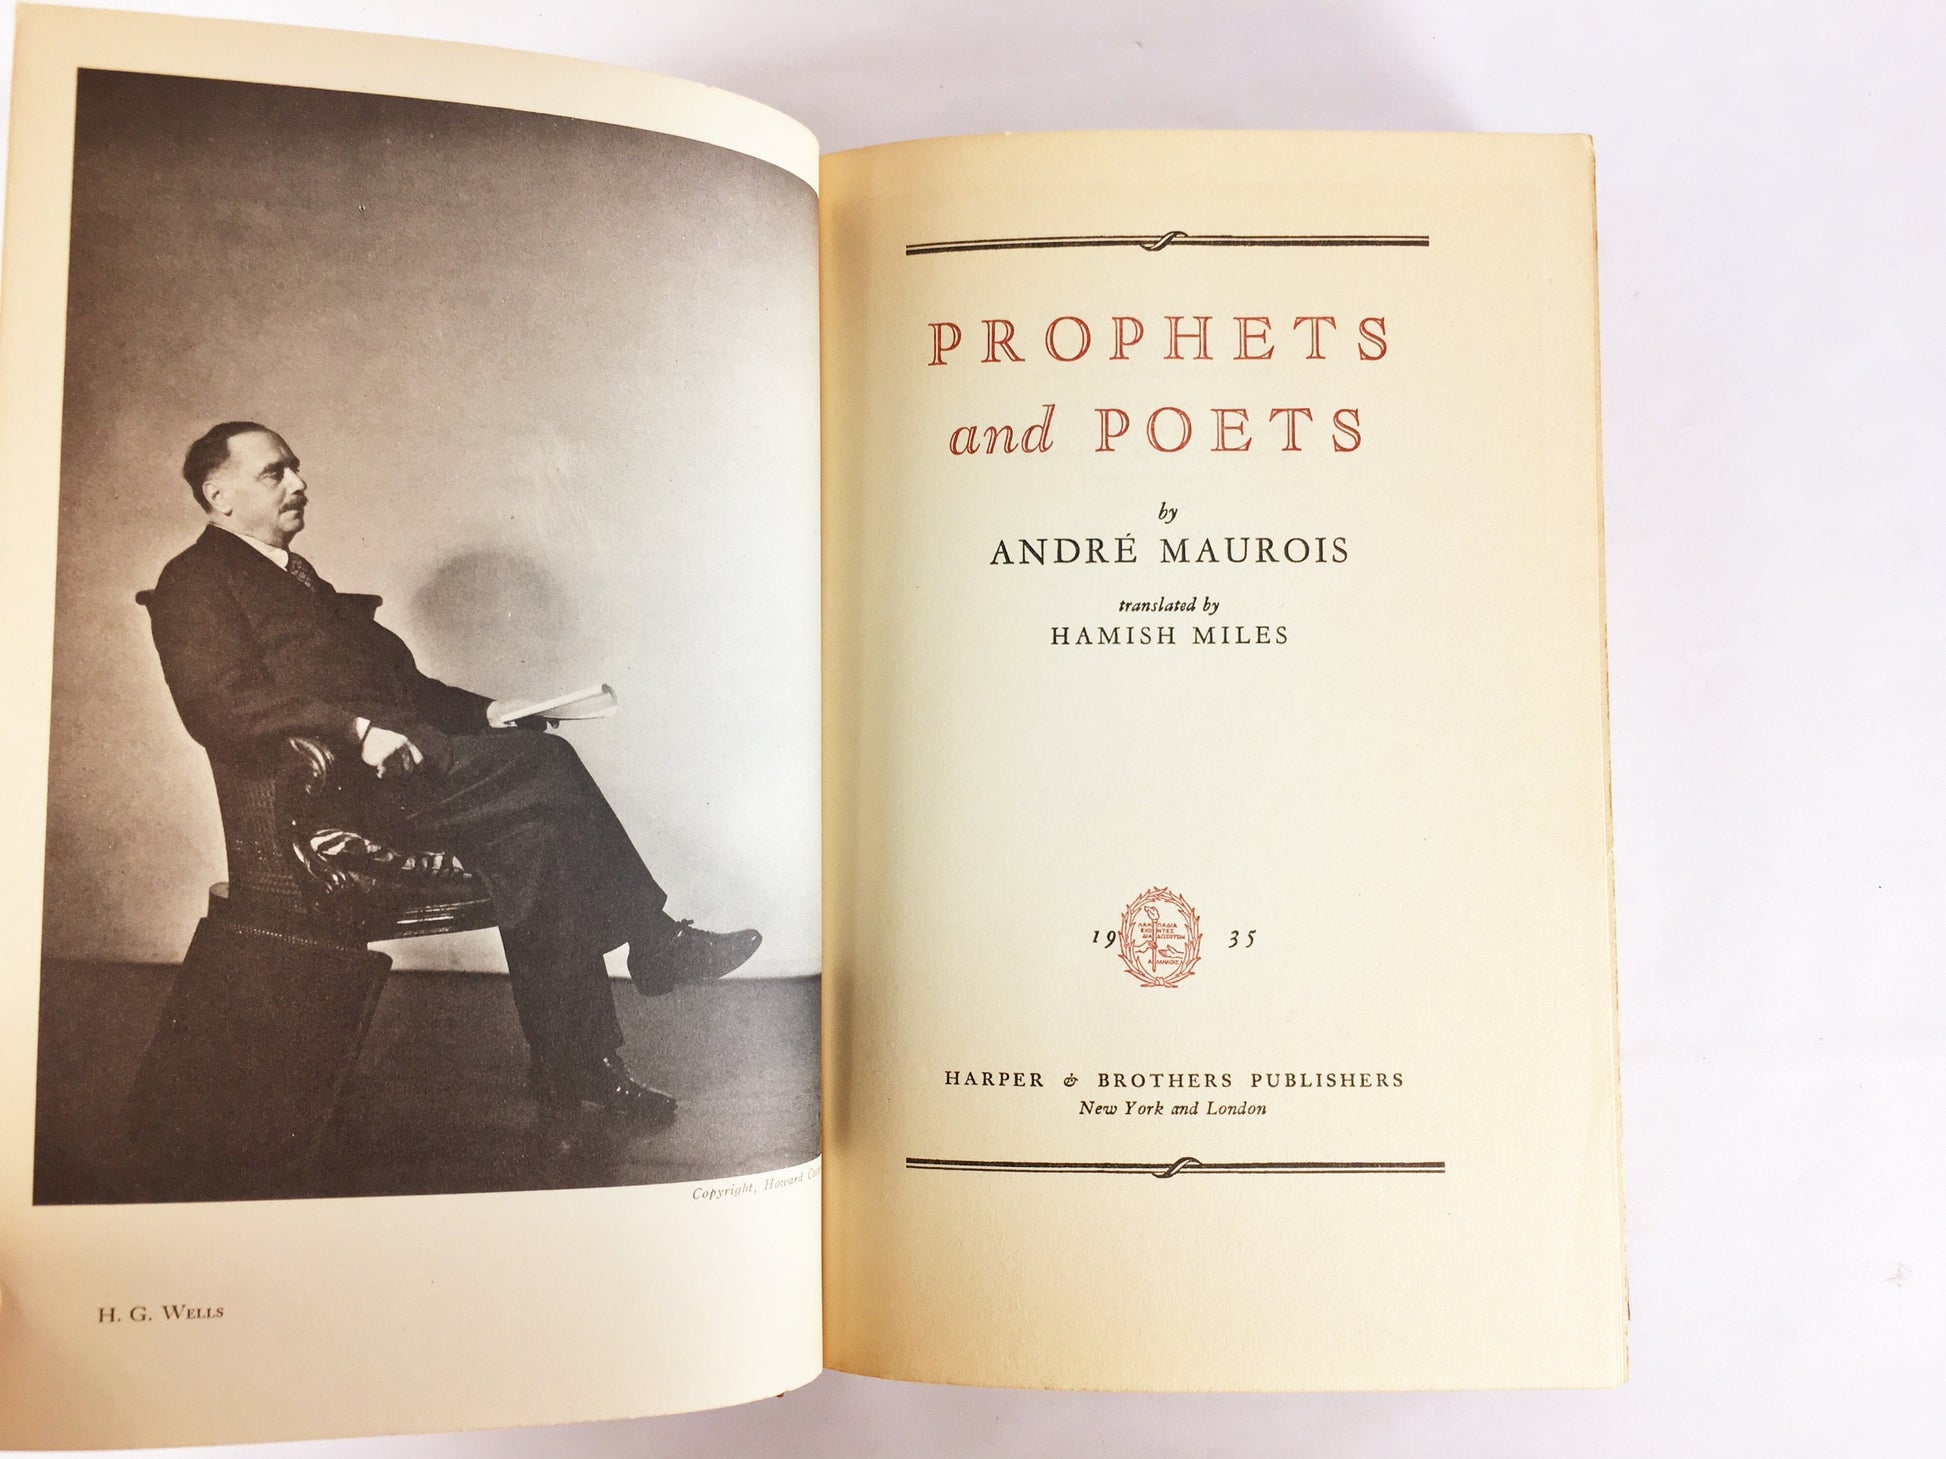 Prophets and Poets. Eighteenth Century Poetry & Prose. Beautiful book of poetry circa 1935. Red cloth book decor. Vintage gift André Maurois